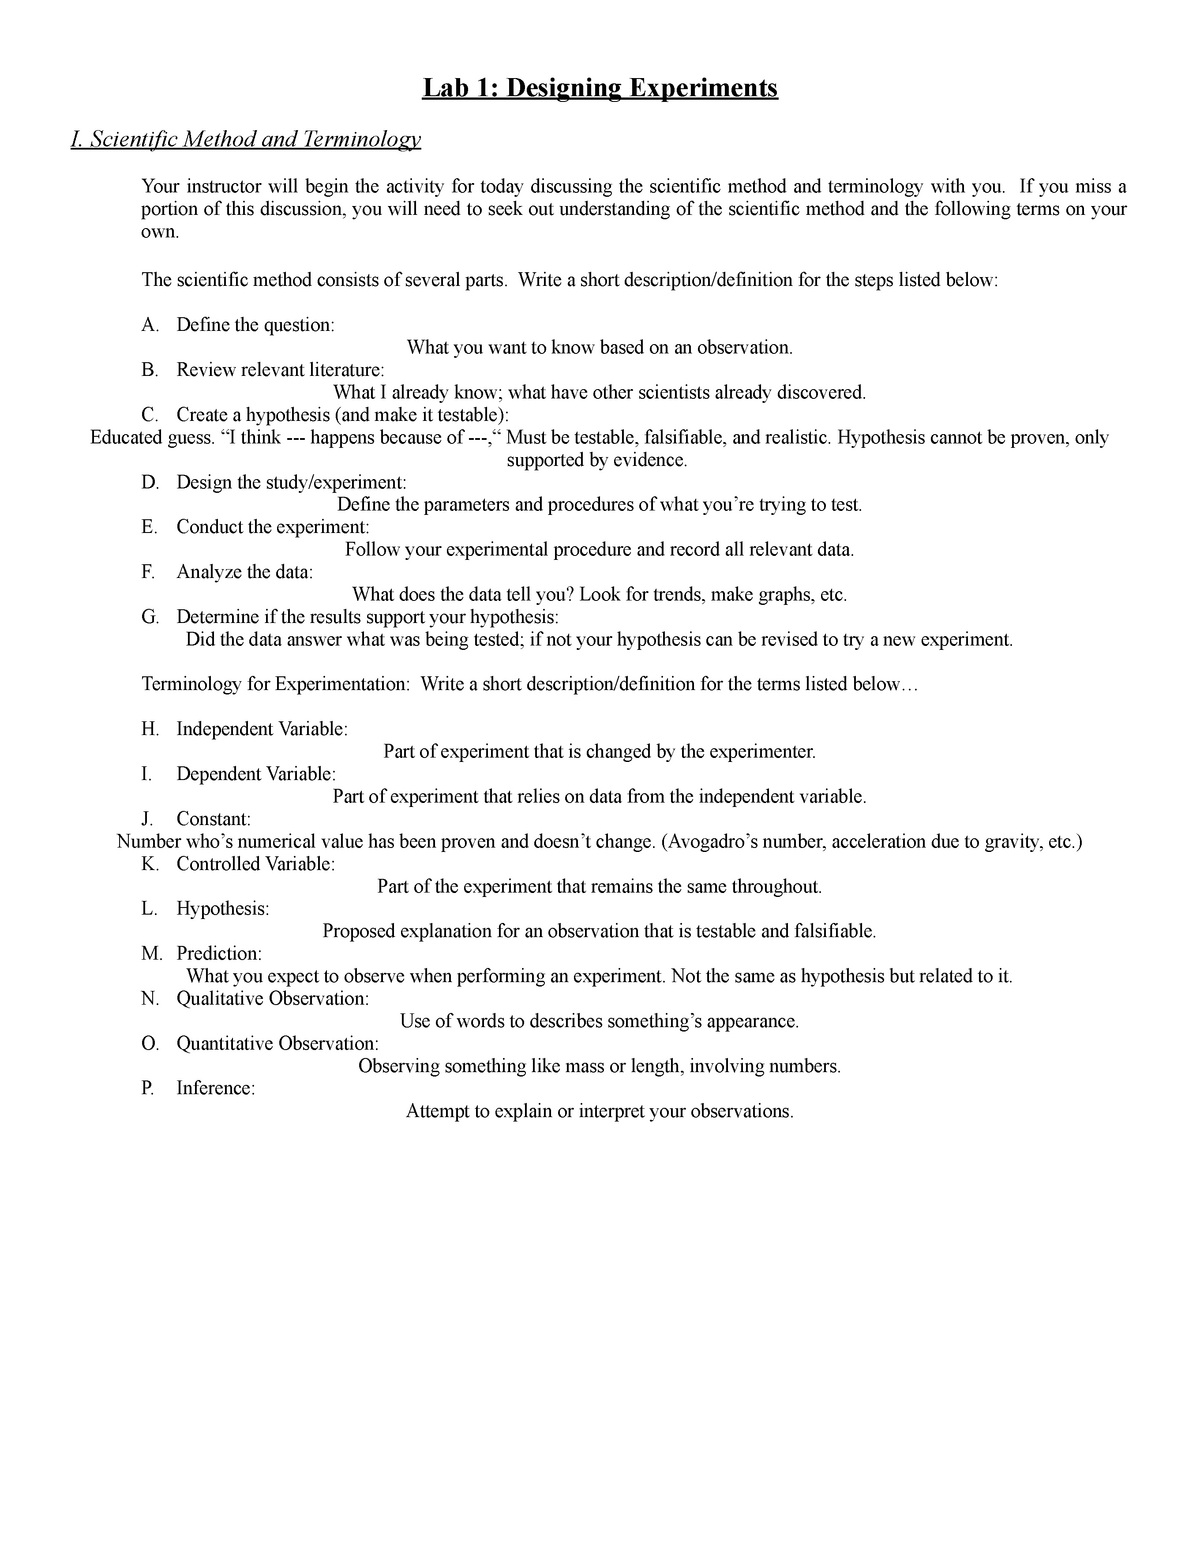 Lab 22 - Designing Experiments - Scientific Method and Terminology With Experimental Design Worksheet Answers